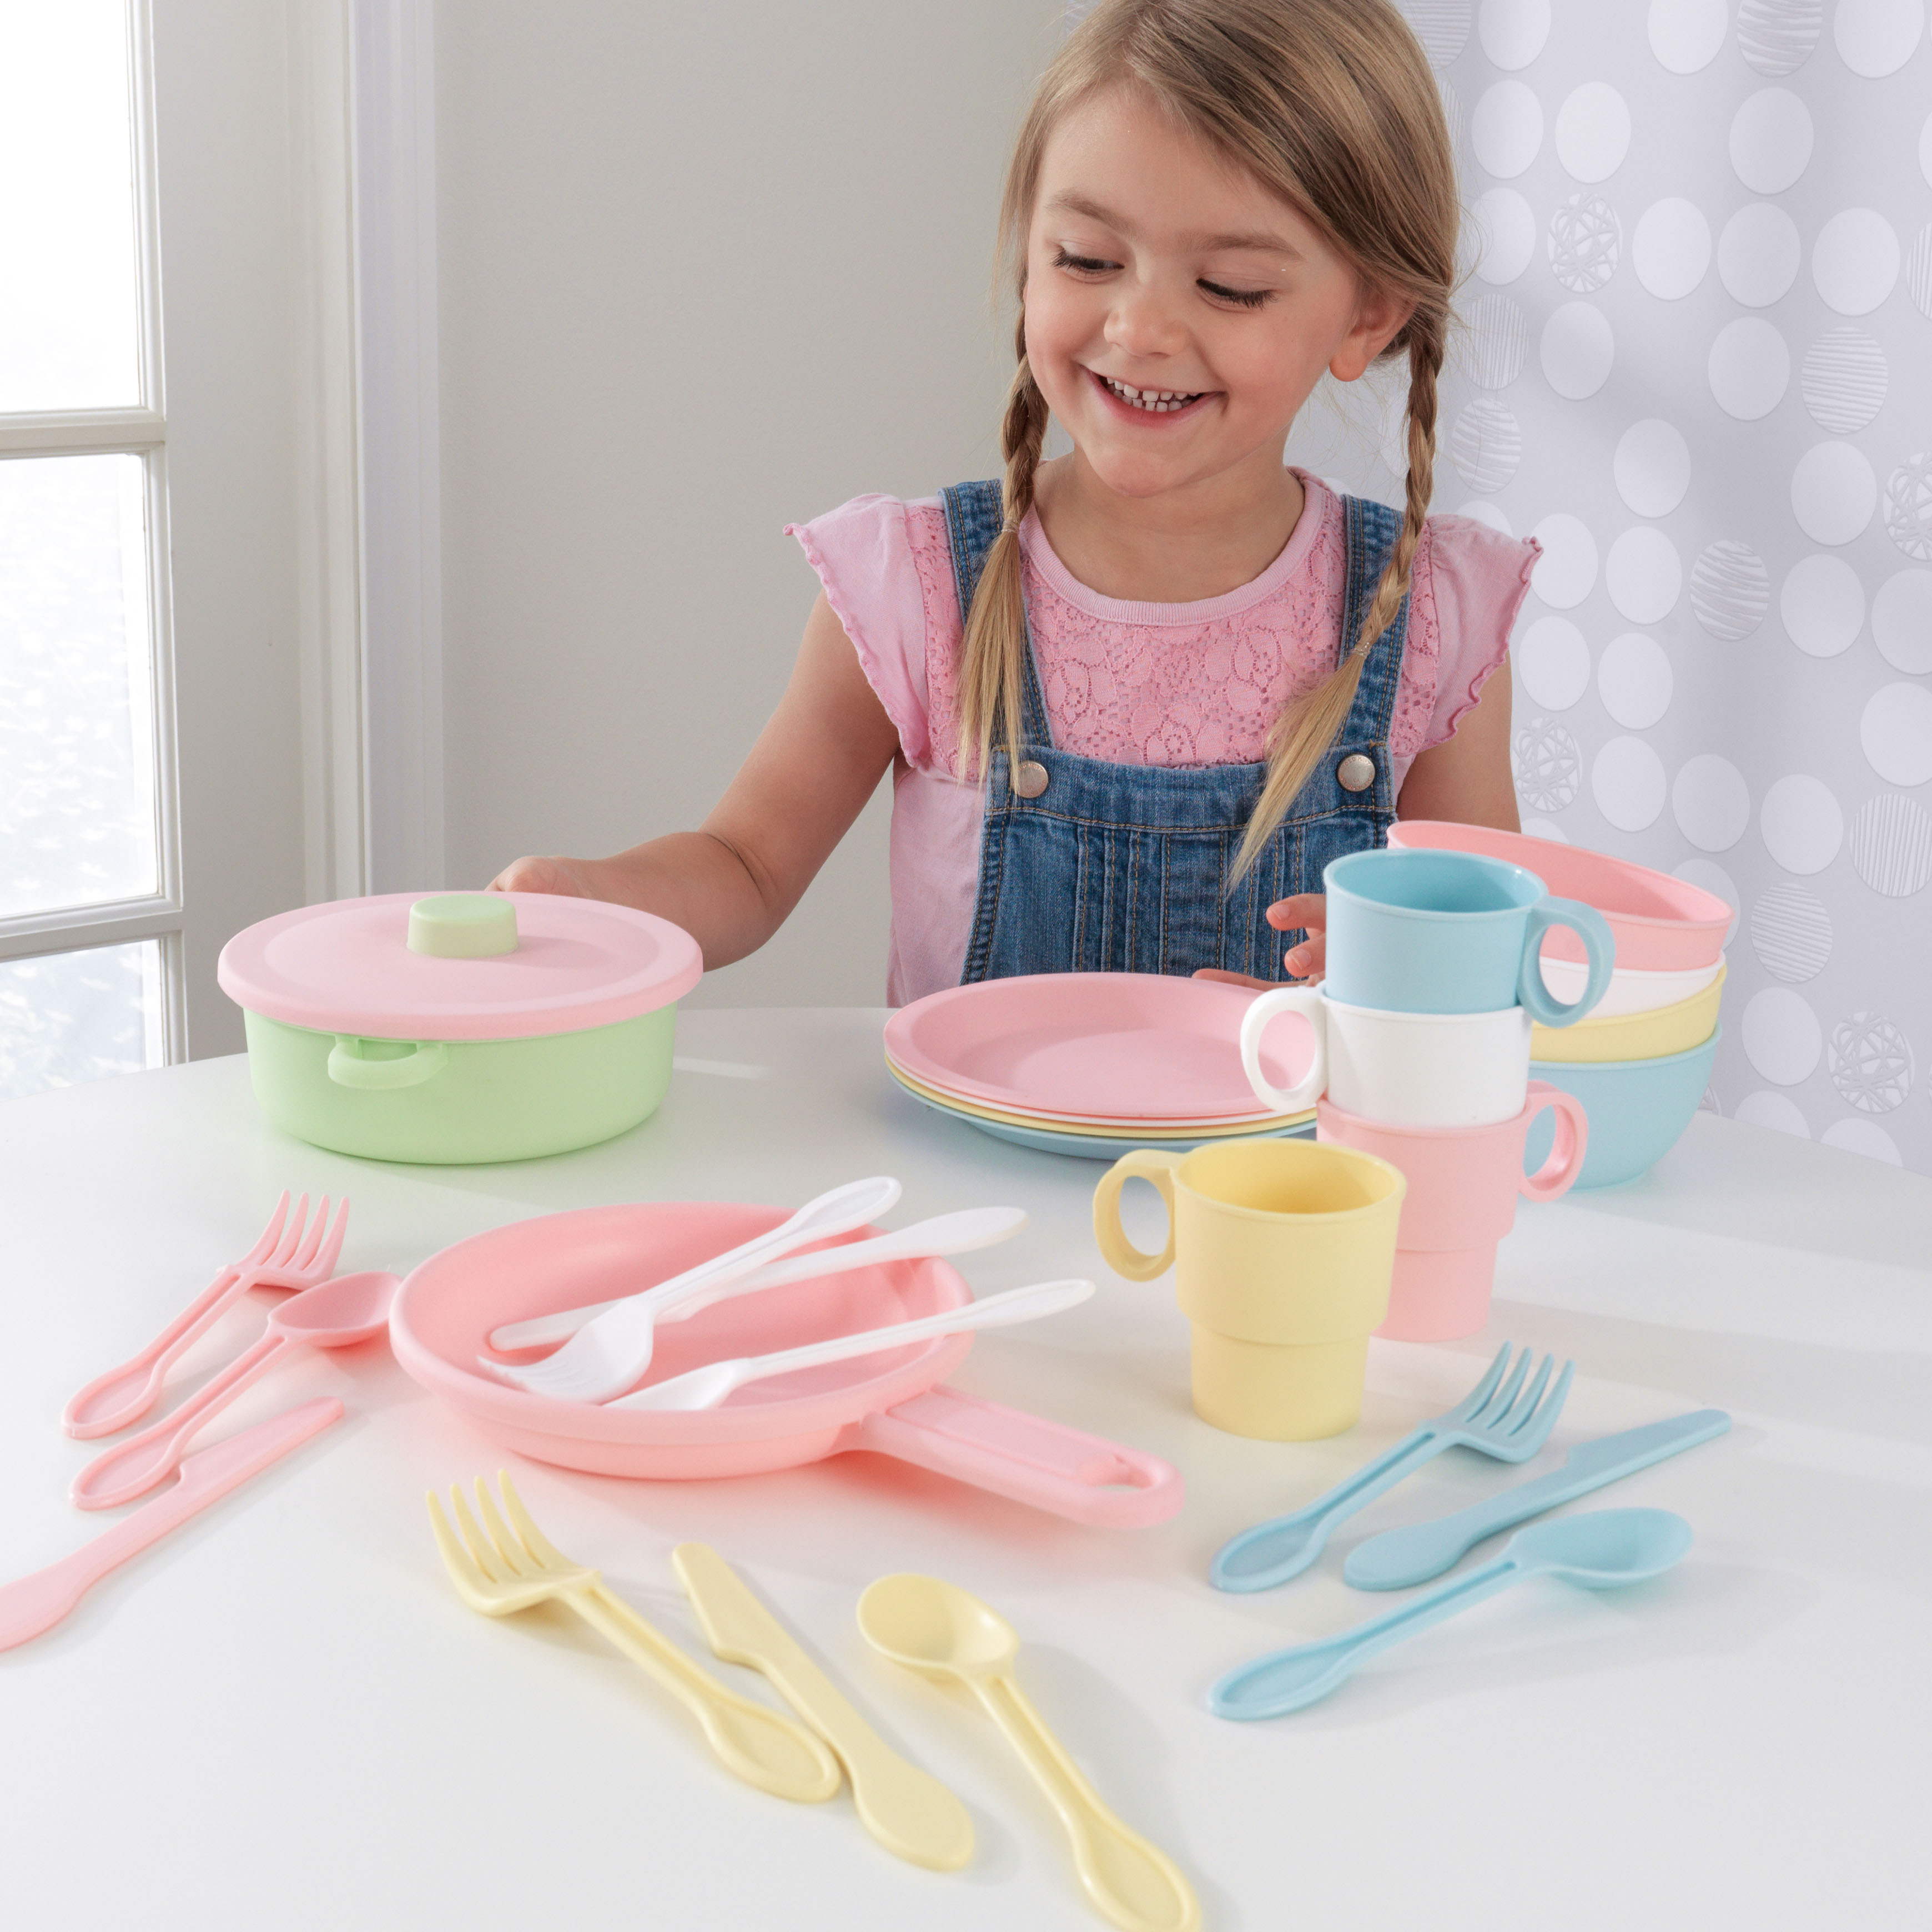 KidKraft 27-Piece Pastel Cookware Set, Plastic Dishes & Utensils for Play Kitchens - image 3 of 5